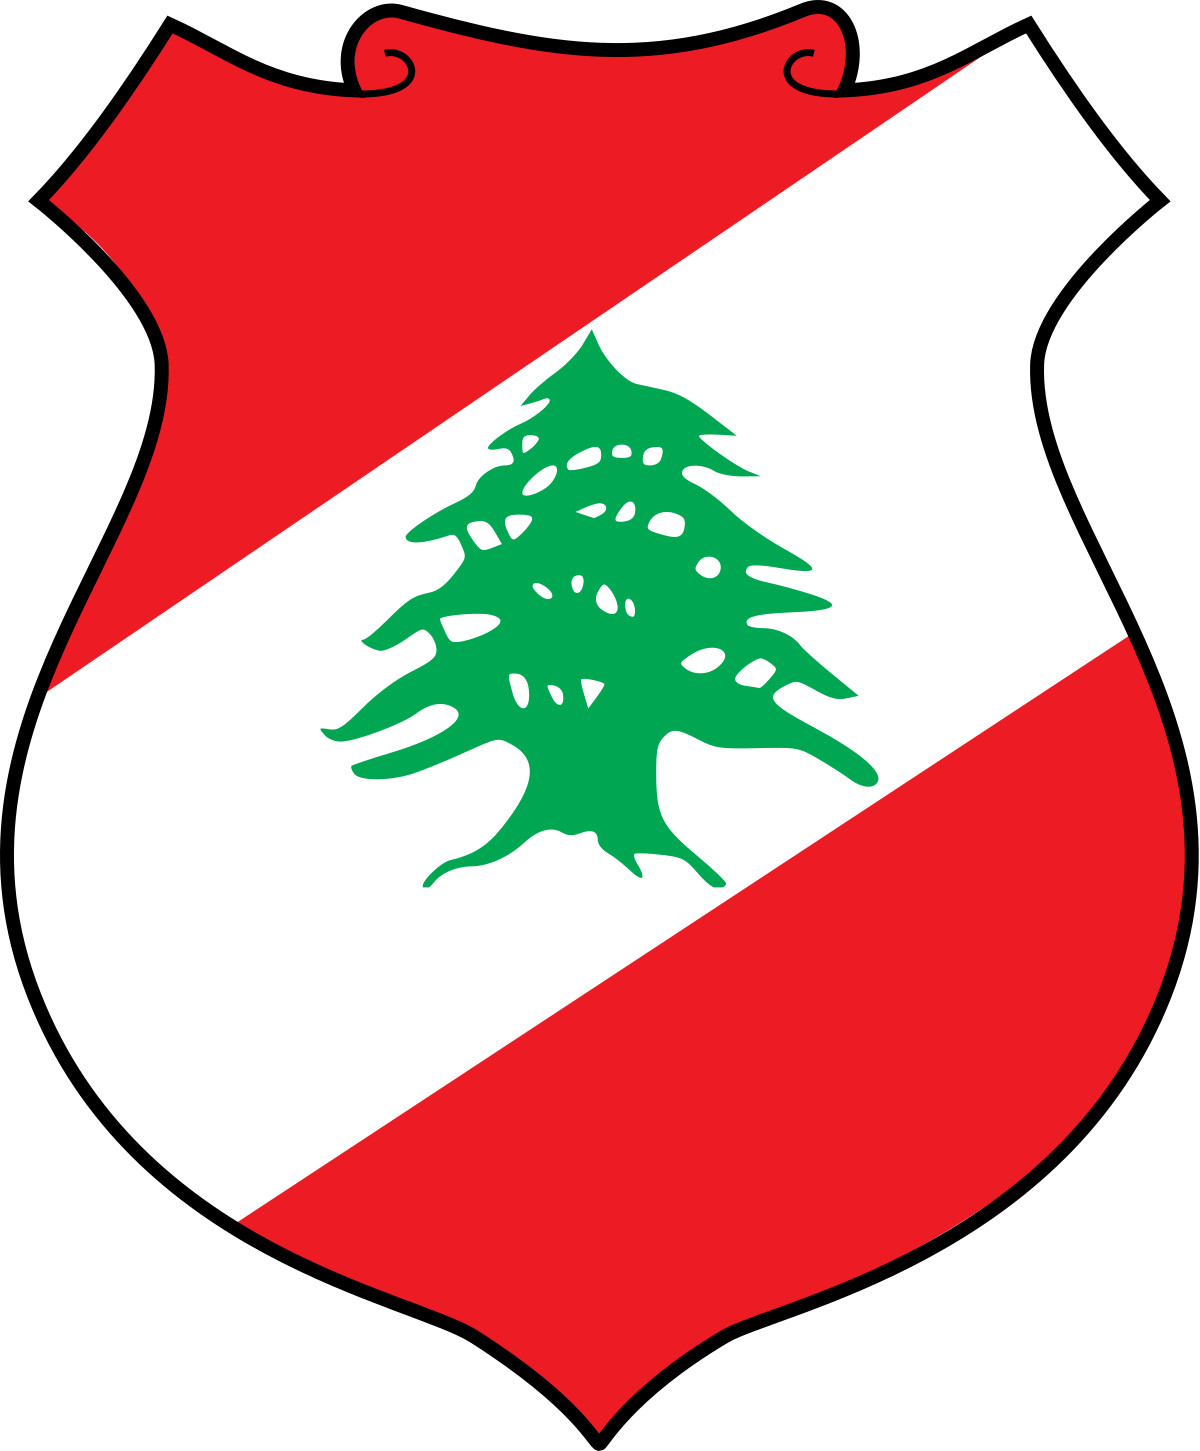 1200px-Coat_of_arms_of_Lebanon.svg.png